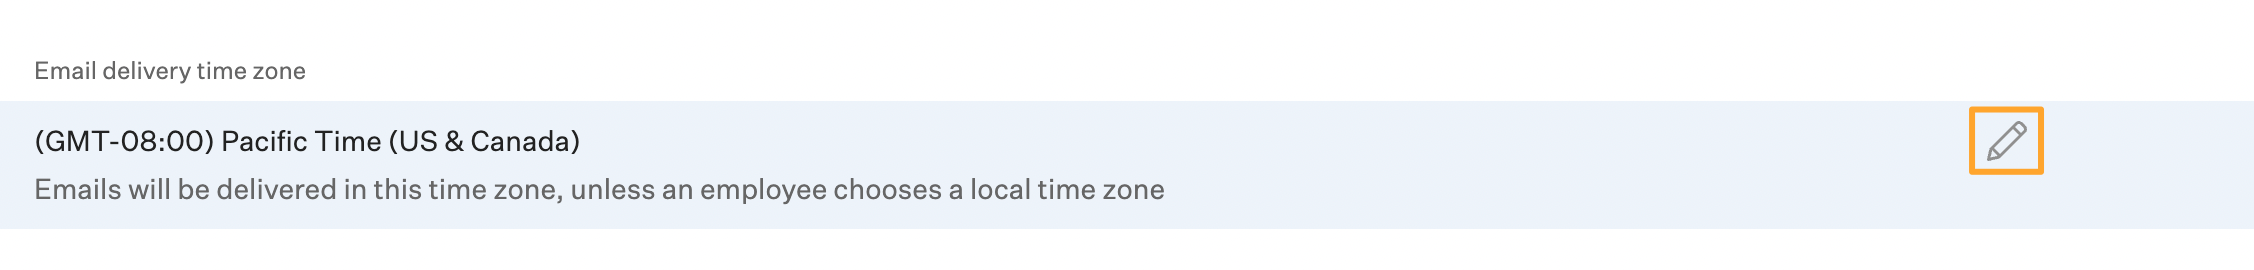 Screenshot of email delivery time zone section with edit button highlighted